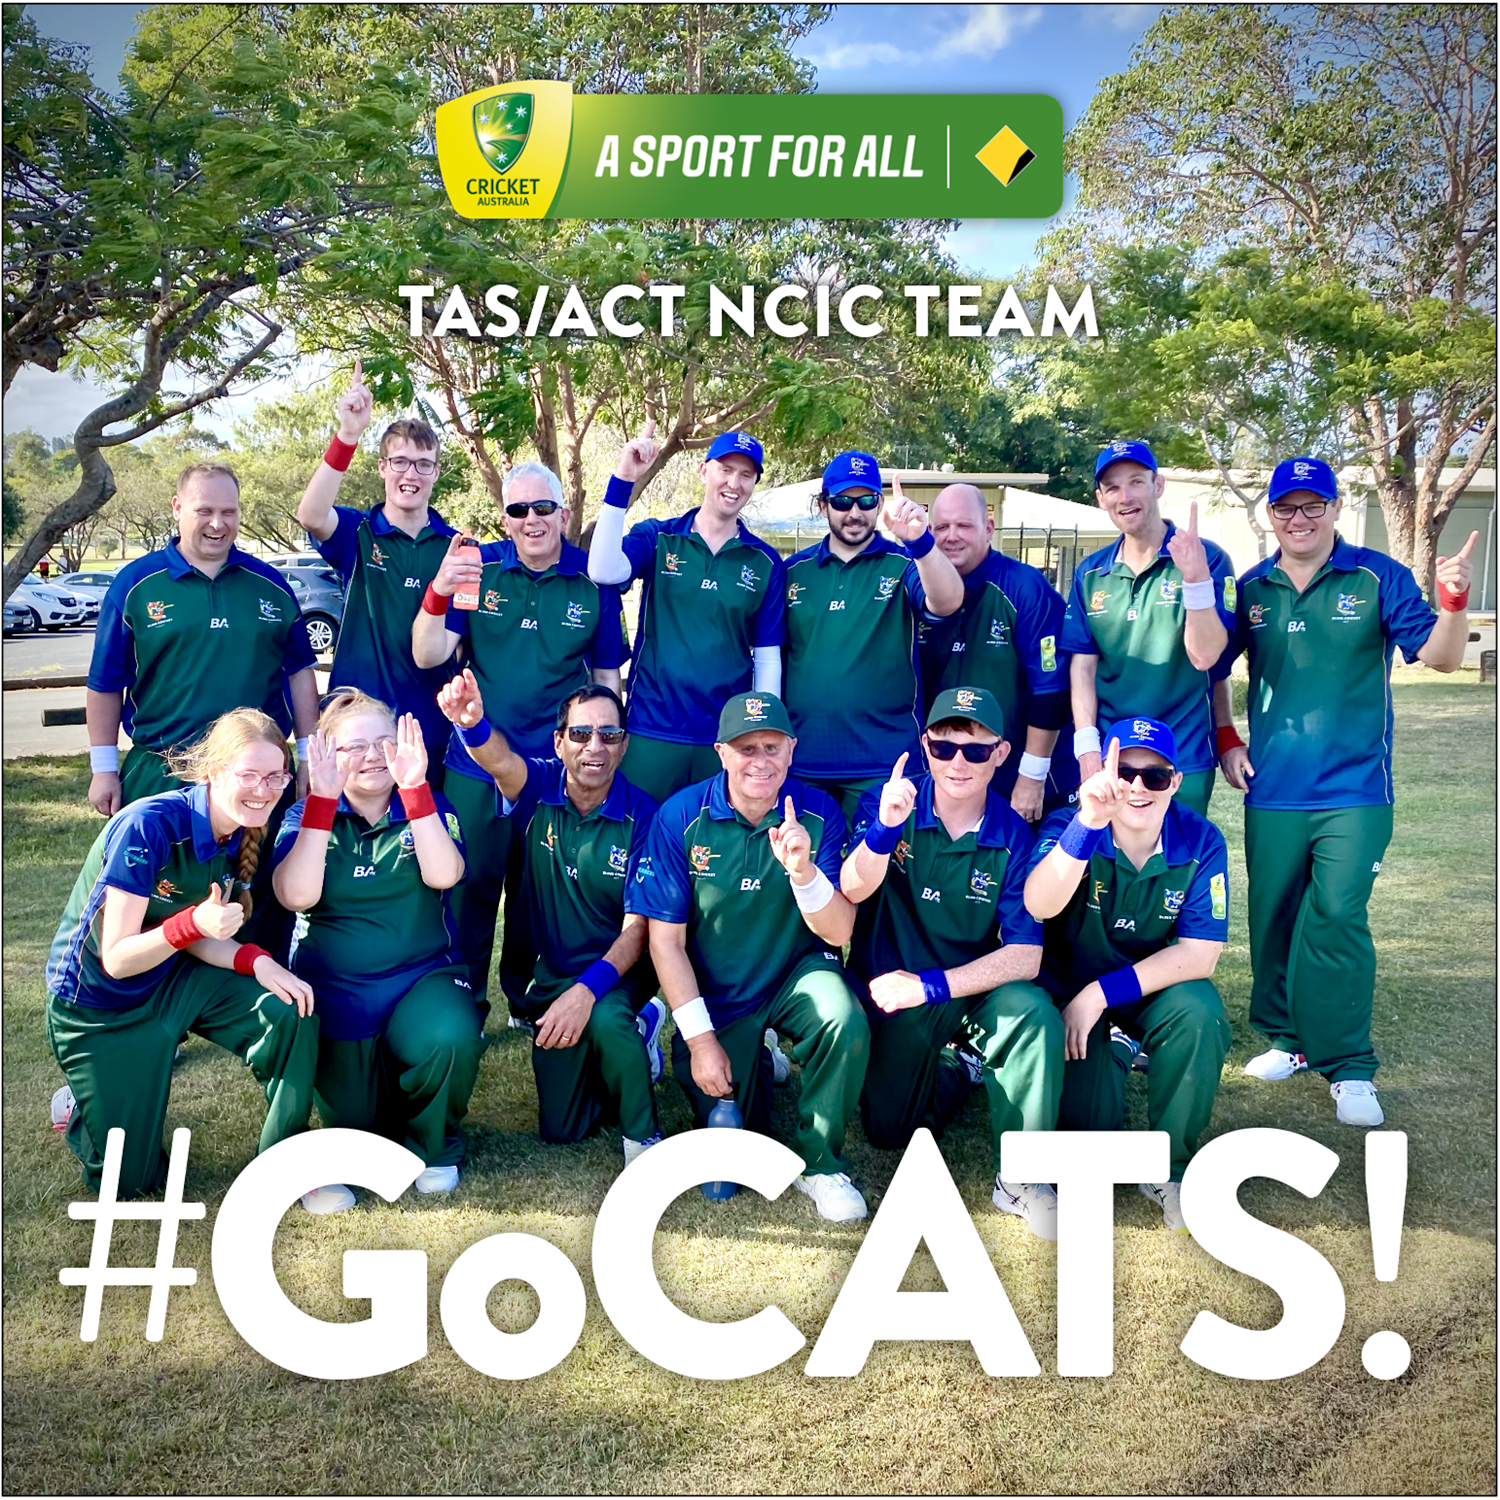 The 14 TAS and ACT NCIC players in a team lineup photo all making hand gestures suggesting they are ready to take on the competition with pride and passion. Text #GoCats! sits over the photo.